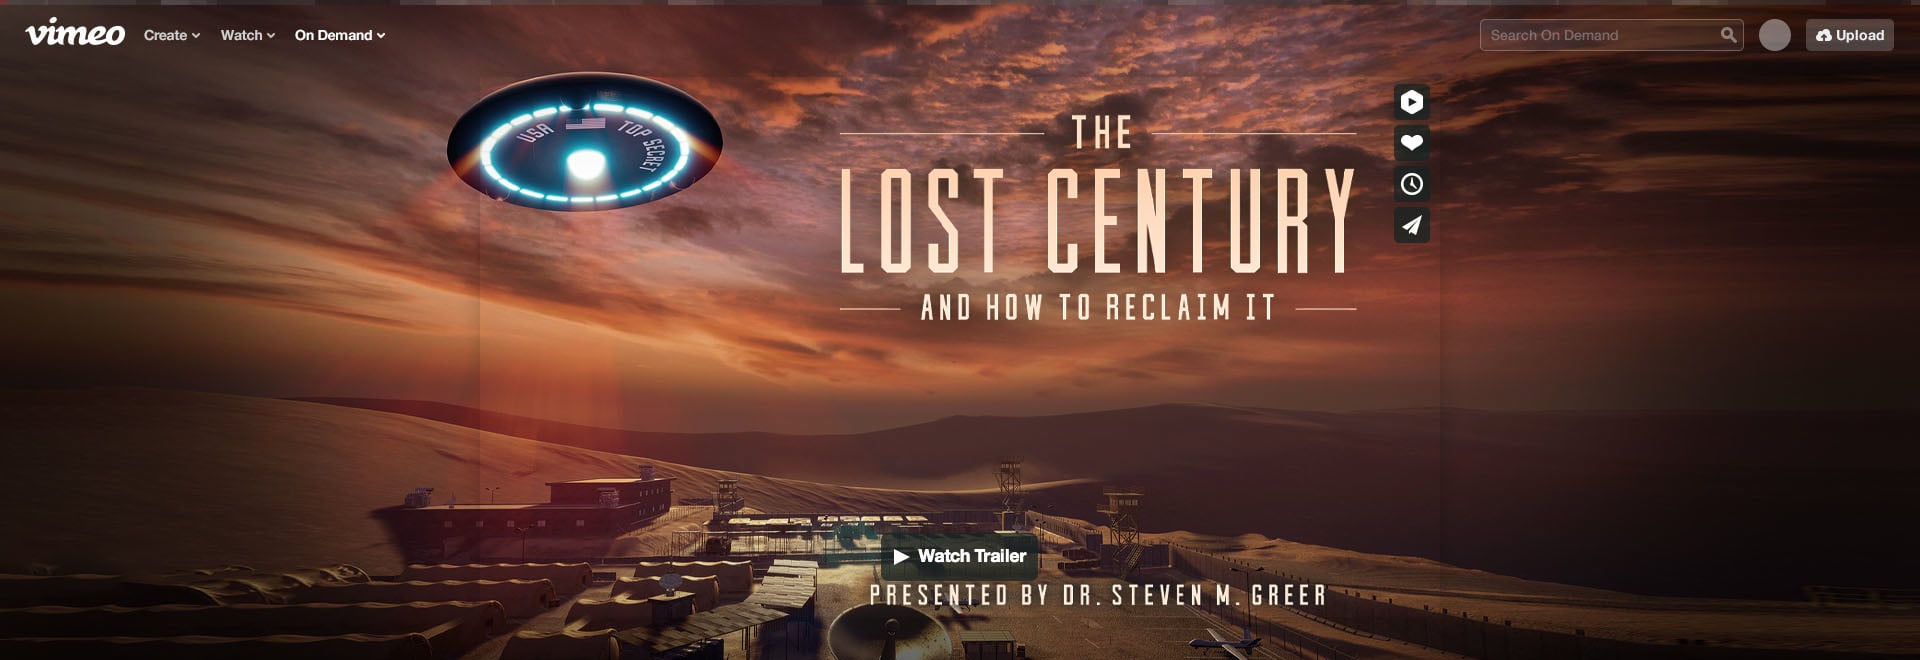 Watch The Lost Century And How to Reclaim It (4K UHD) Online Vimeo